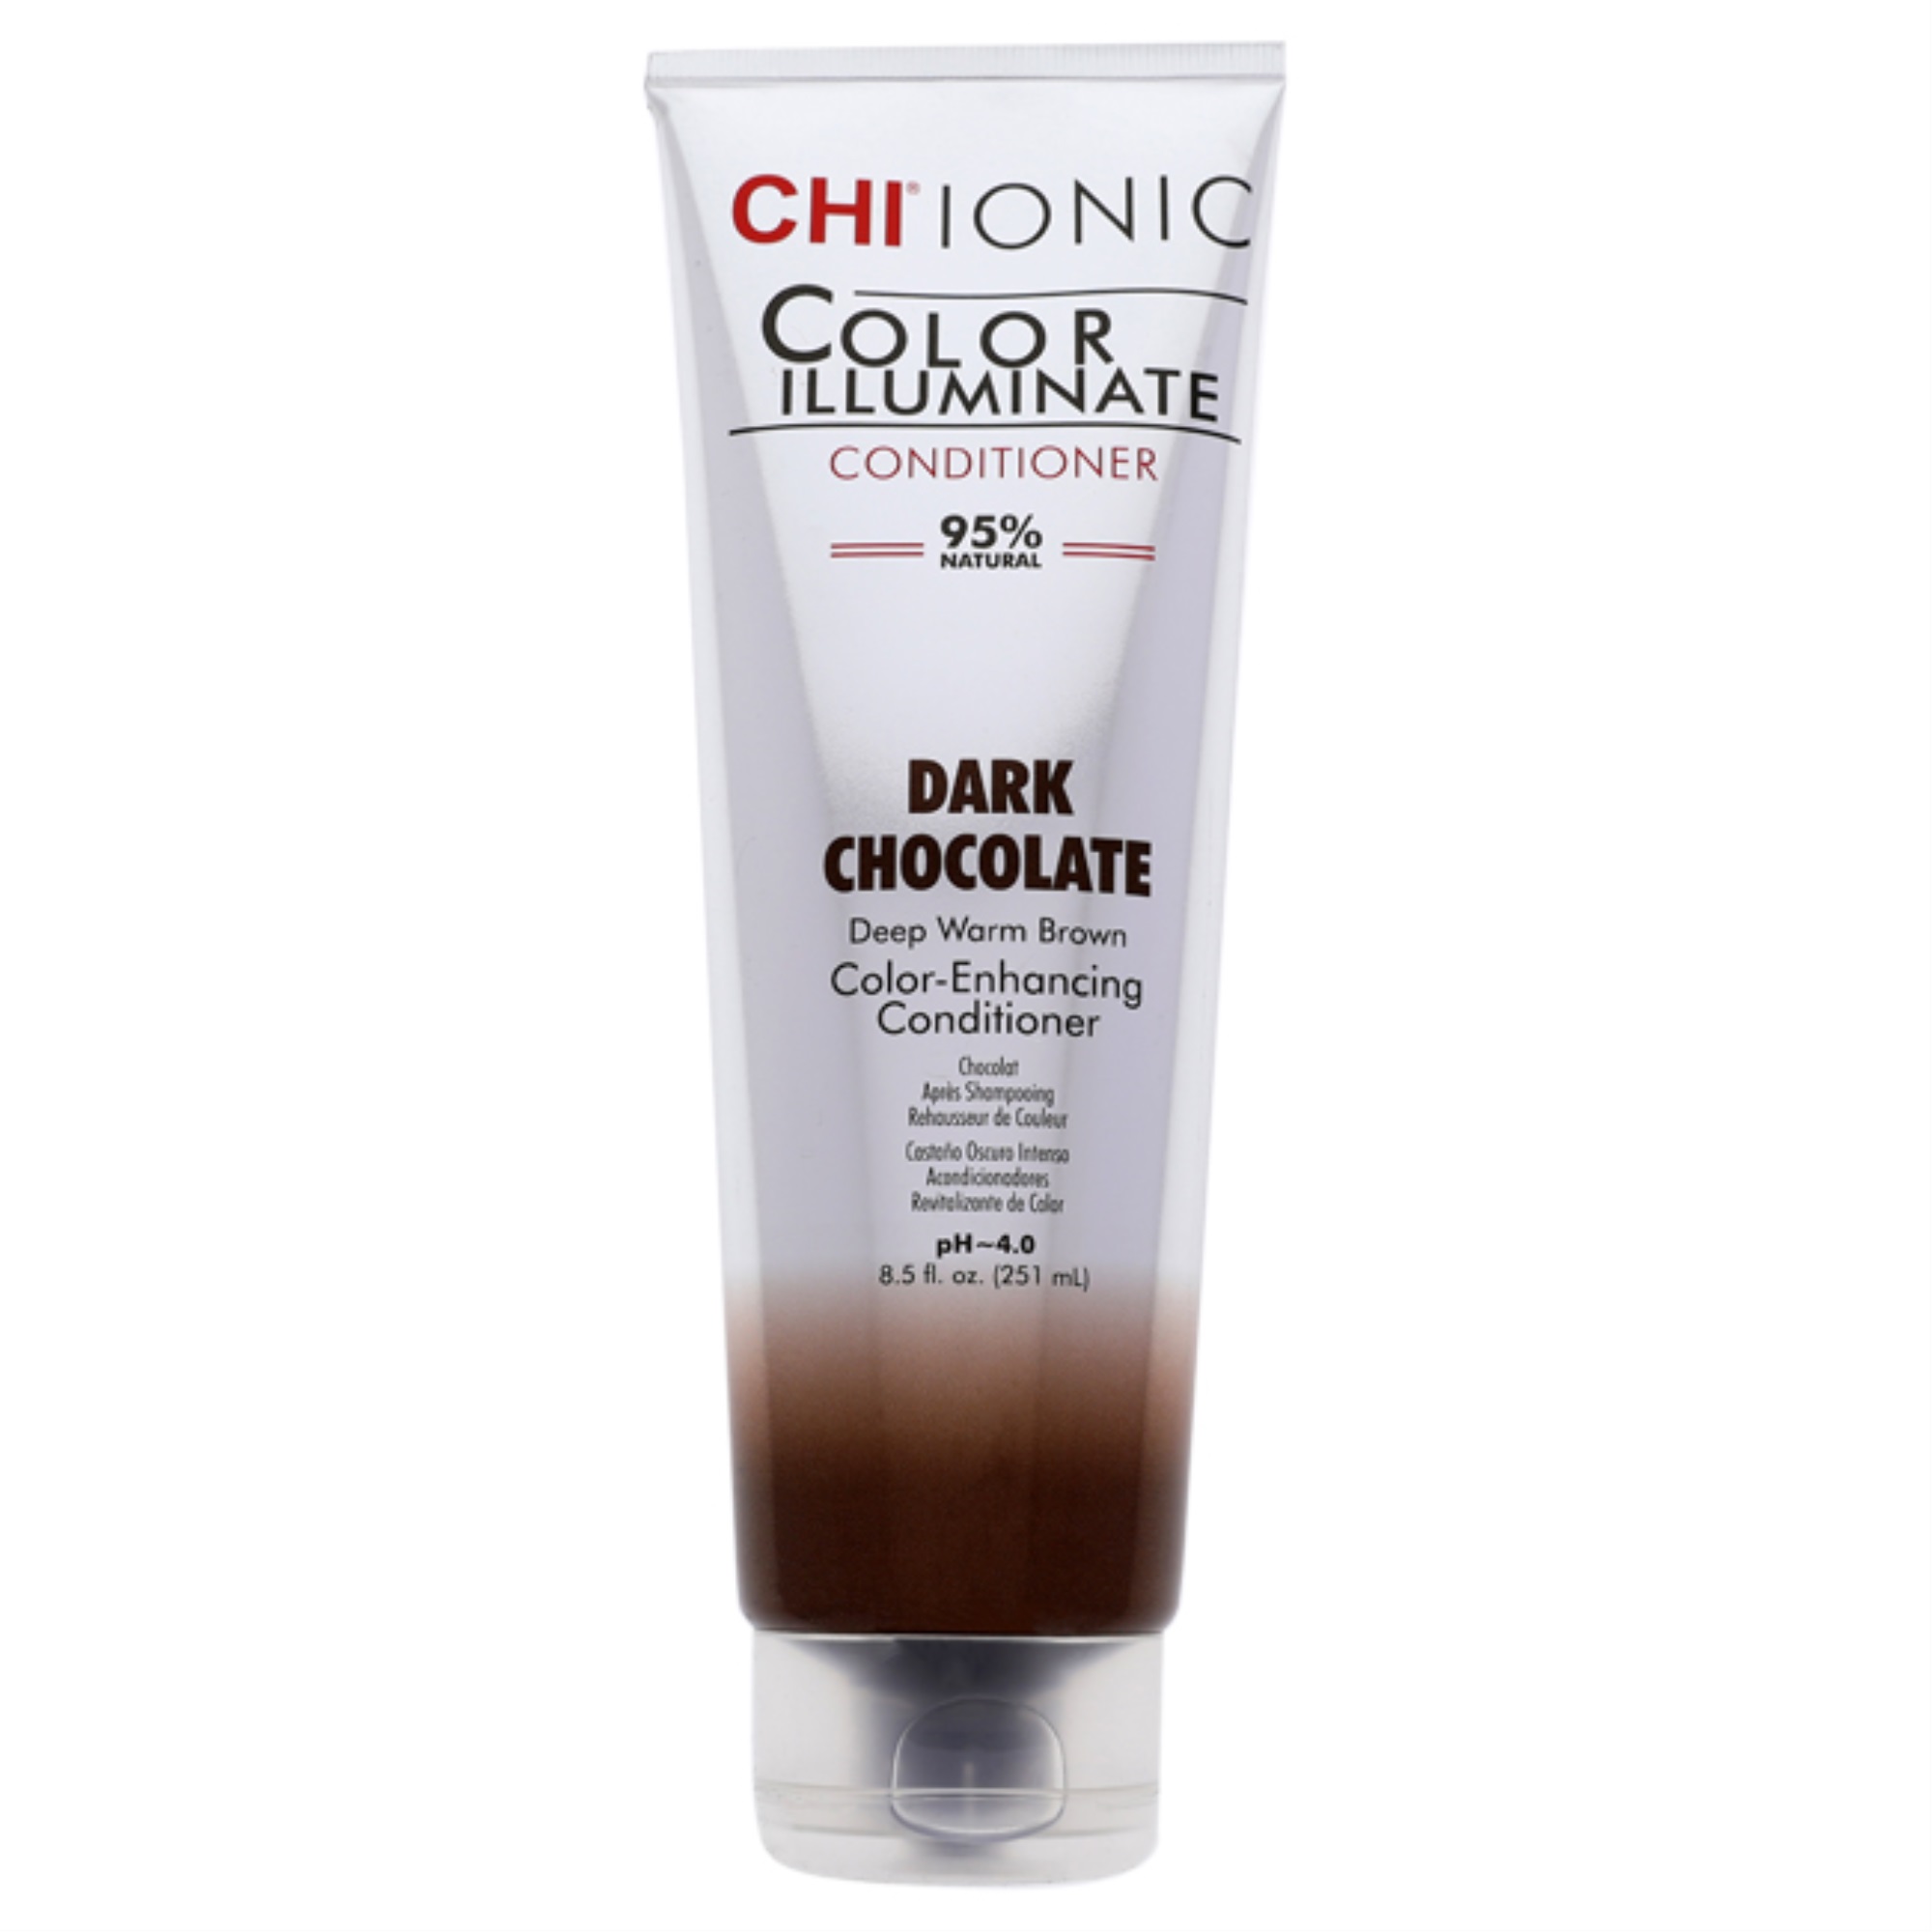 Chi Ionic Color Illuminate Conditioner - Dark Chocolate by CHI for Unisex - 8.5 oz Hair Color